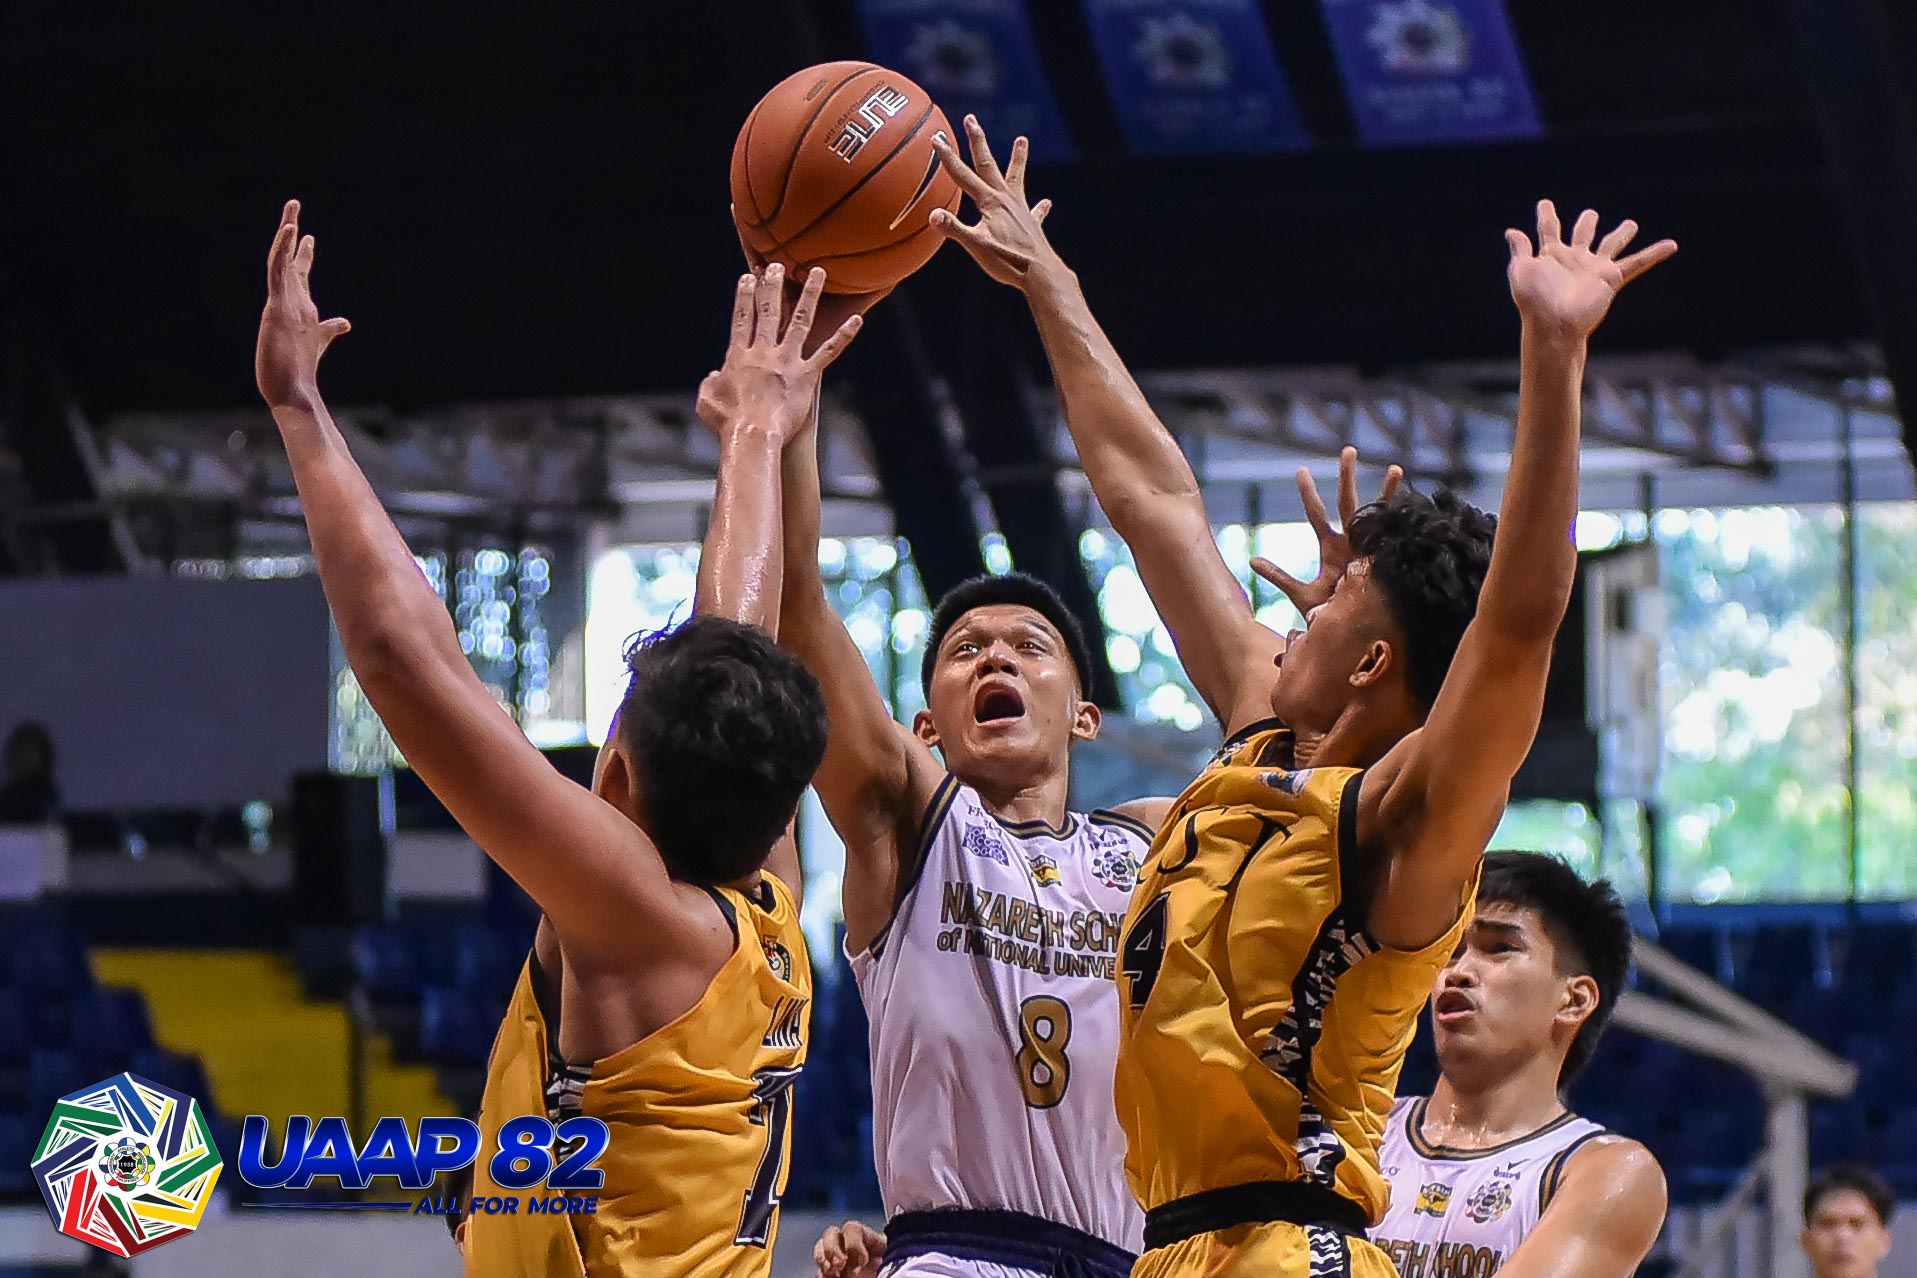 UAAP-82-Jrs-NU-vs.-UST-Abadiano-7765 Ateneo High vents ire on UE for solo third as NU-NS, FEU-D continue runs in UAAP 82 ADMU AdU Basketball DLSU FEU News NU UAAP UE UP UST  - philippine sports news